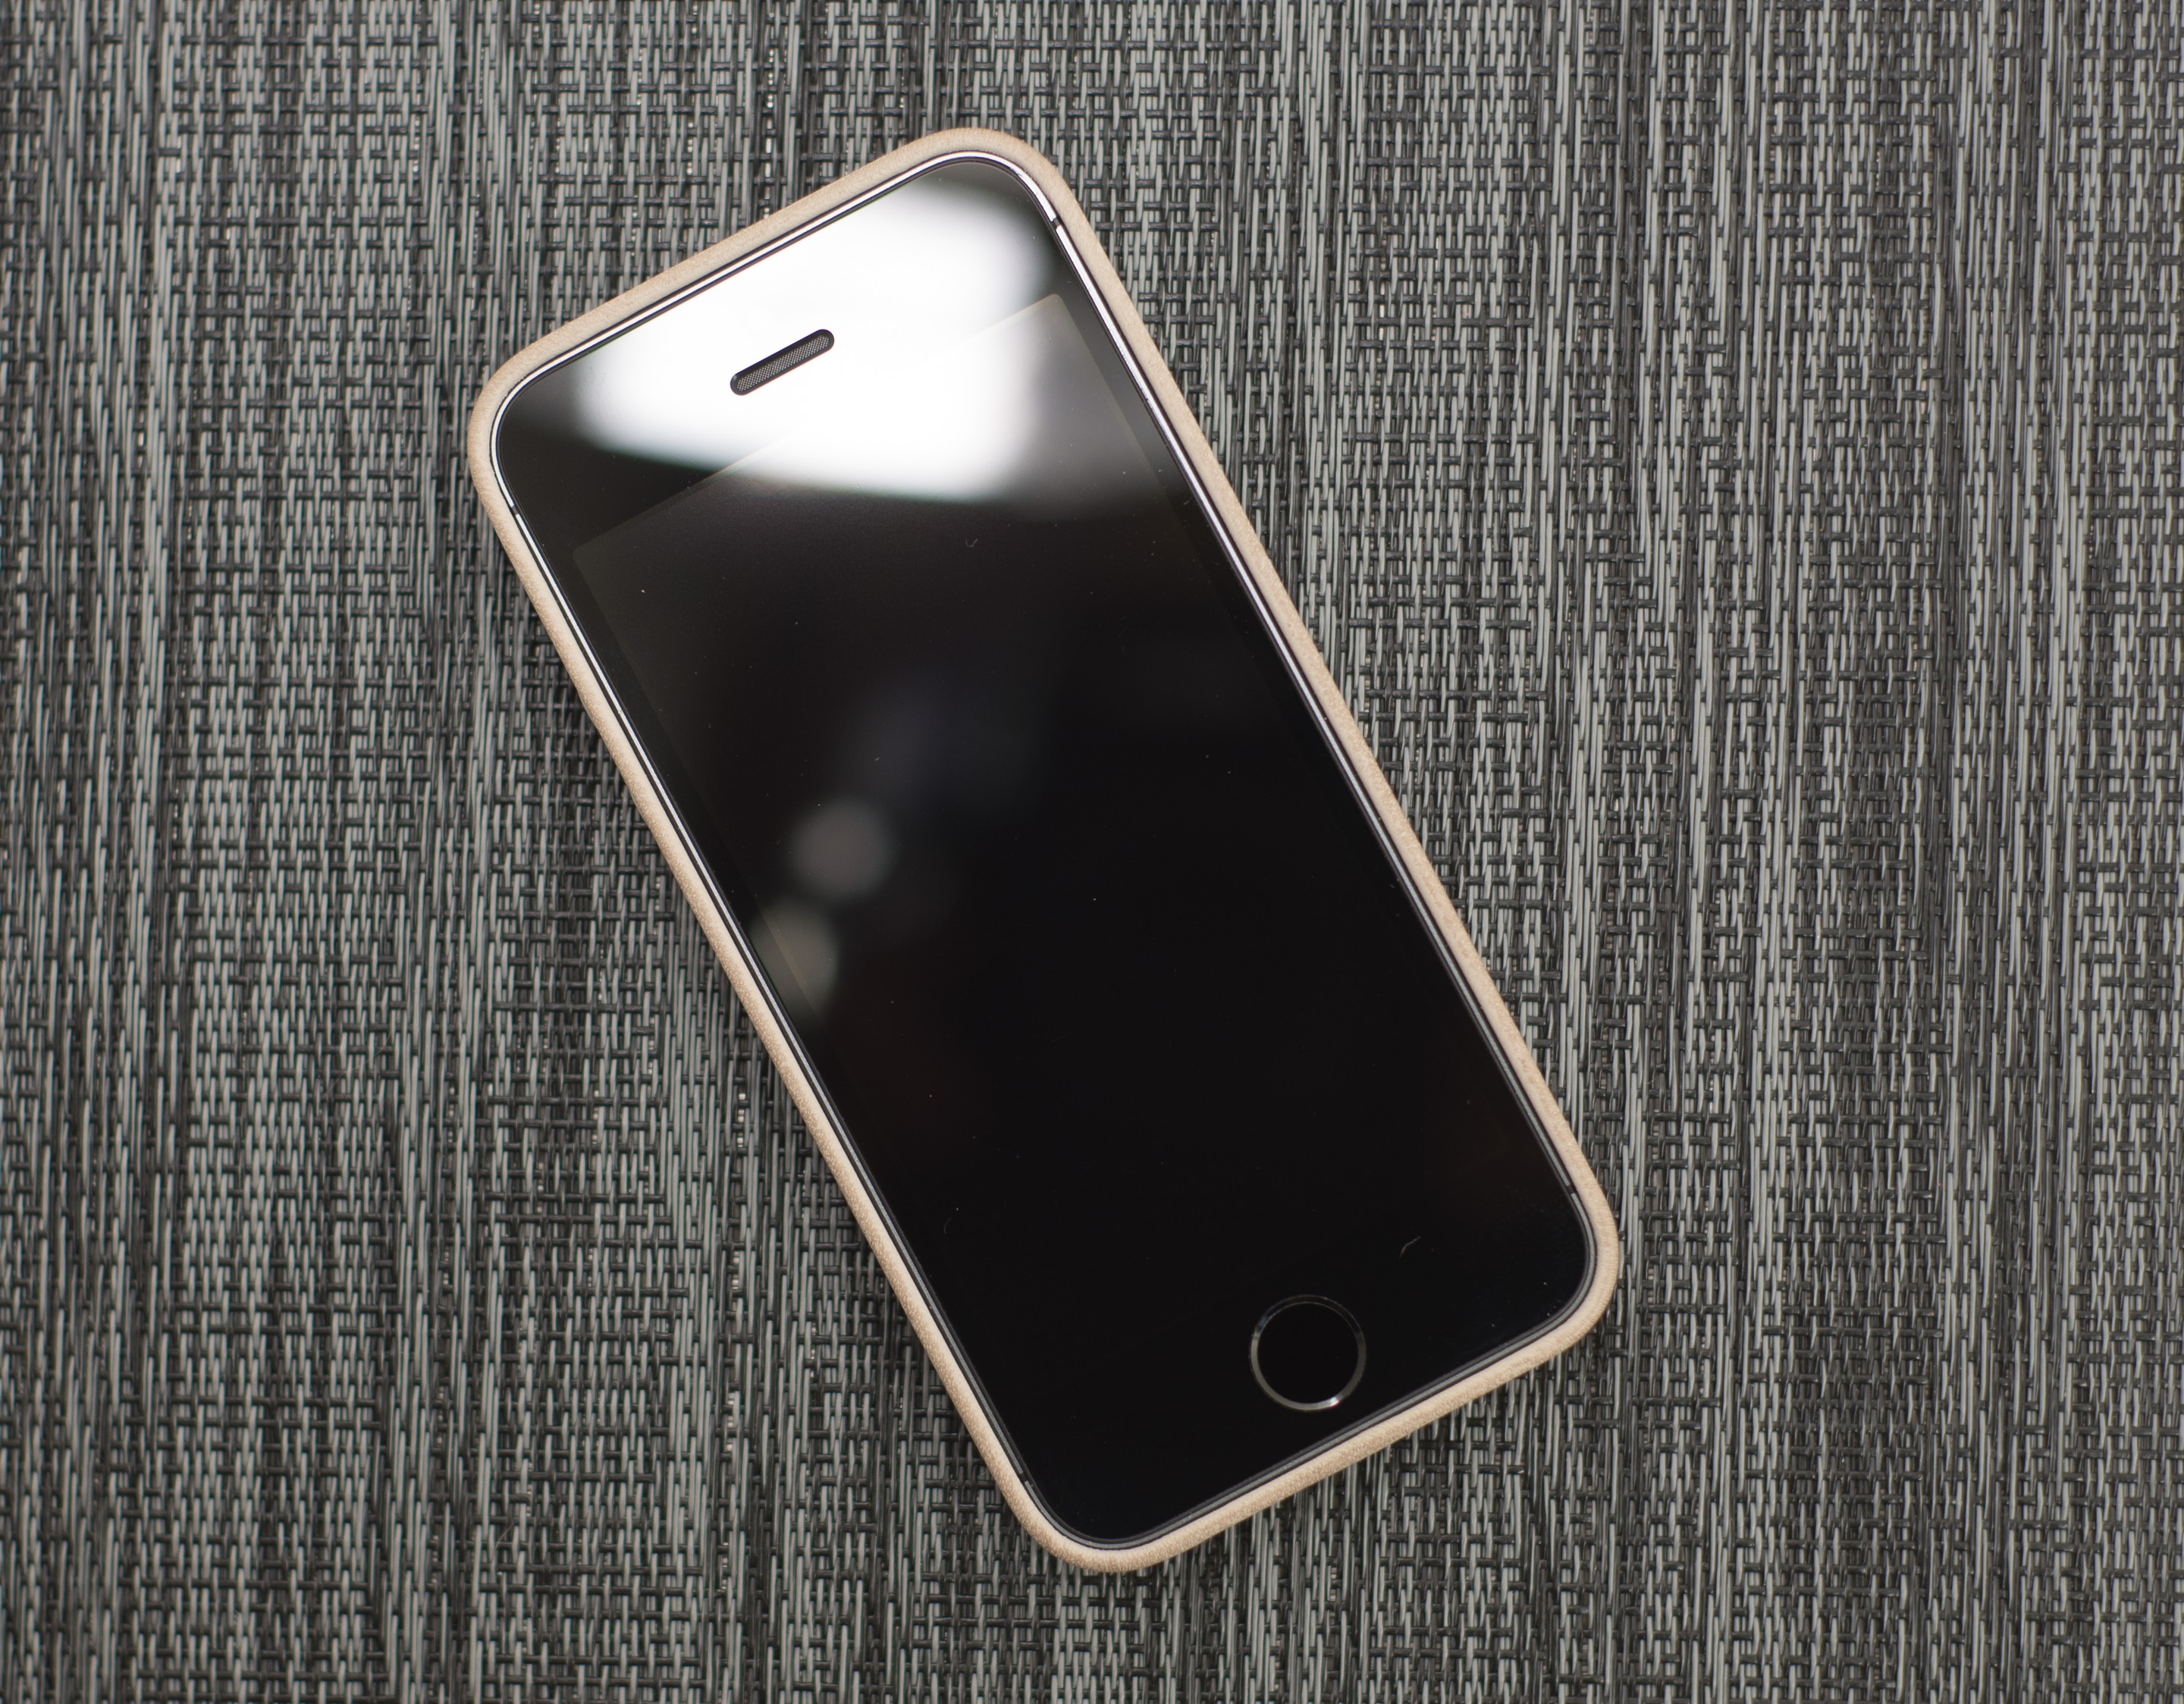 The iPhone 5s Review